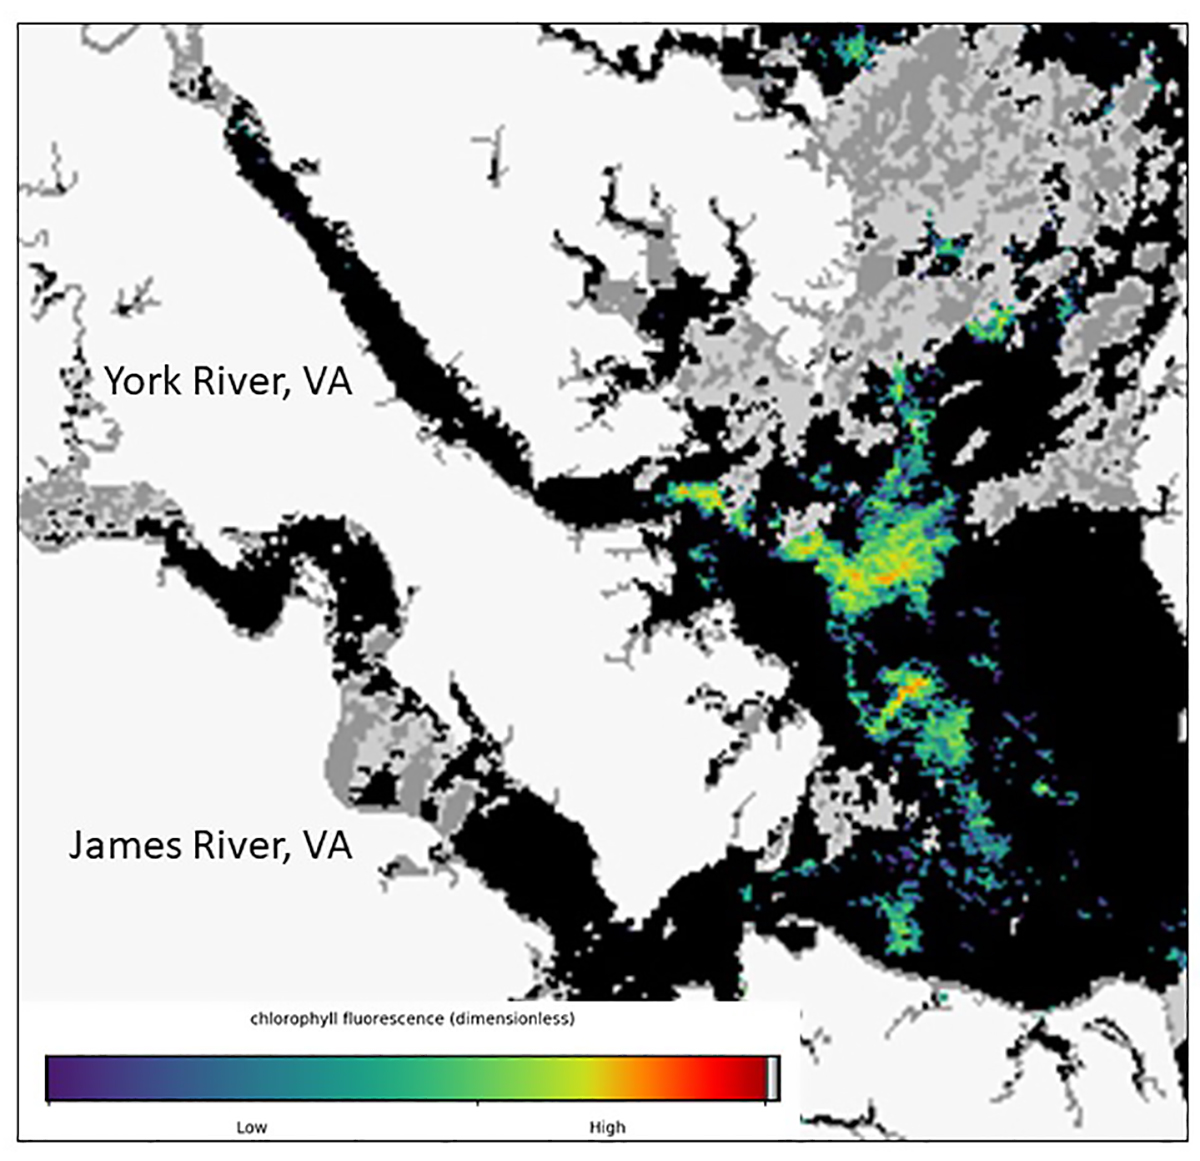 Chlorophyll fluorescence in the York and James Rivers region (Virginia)